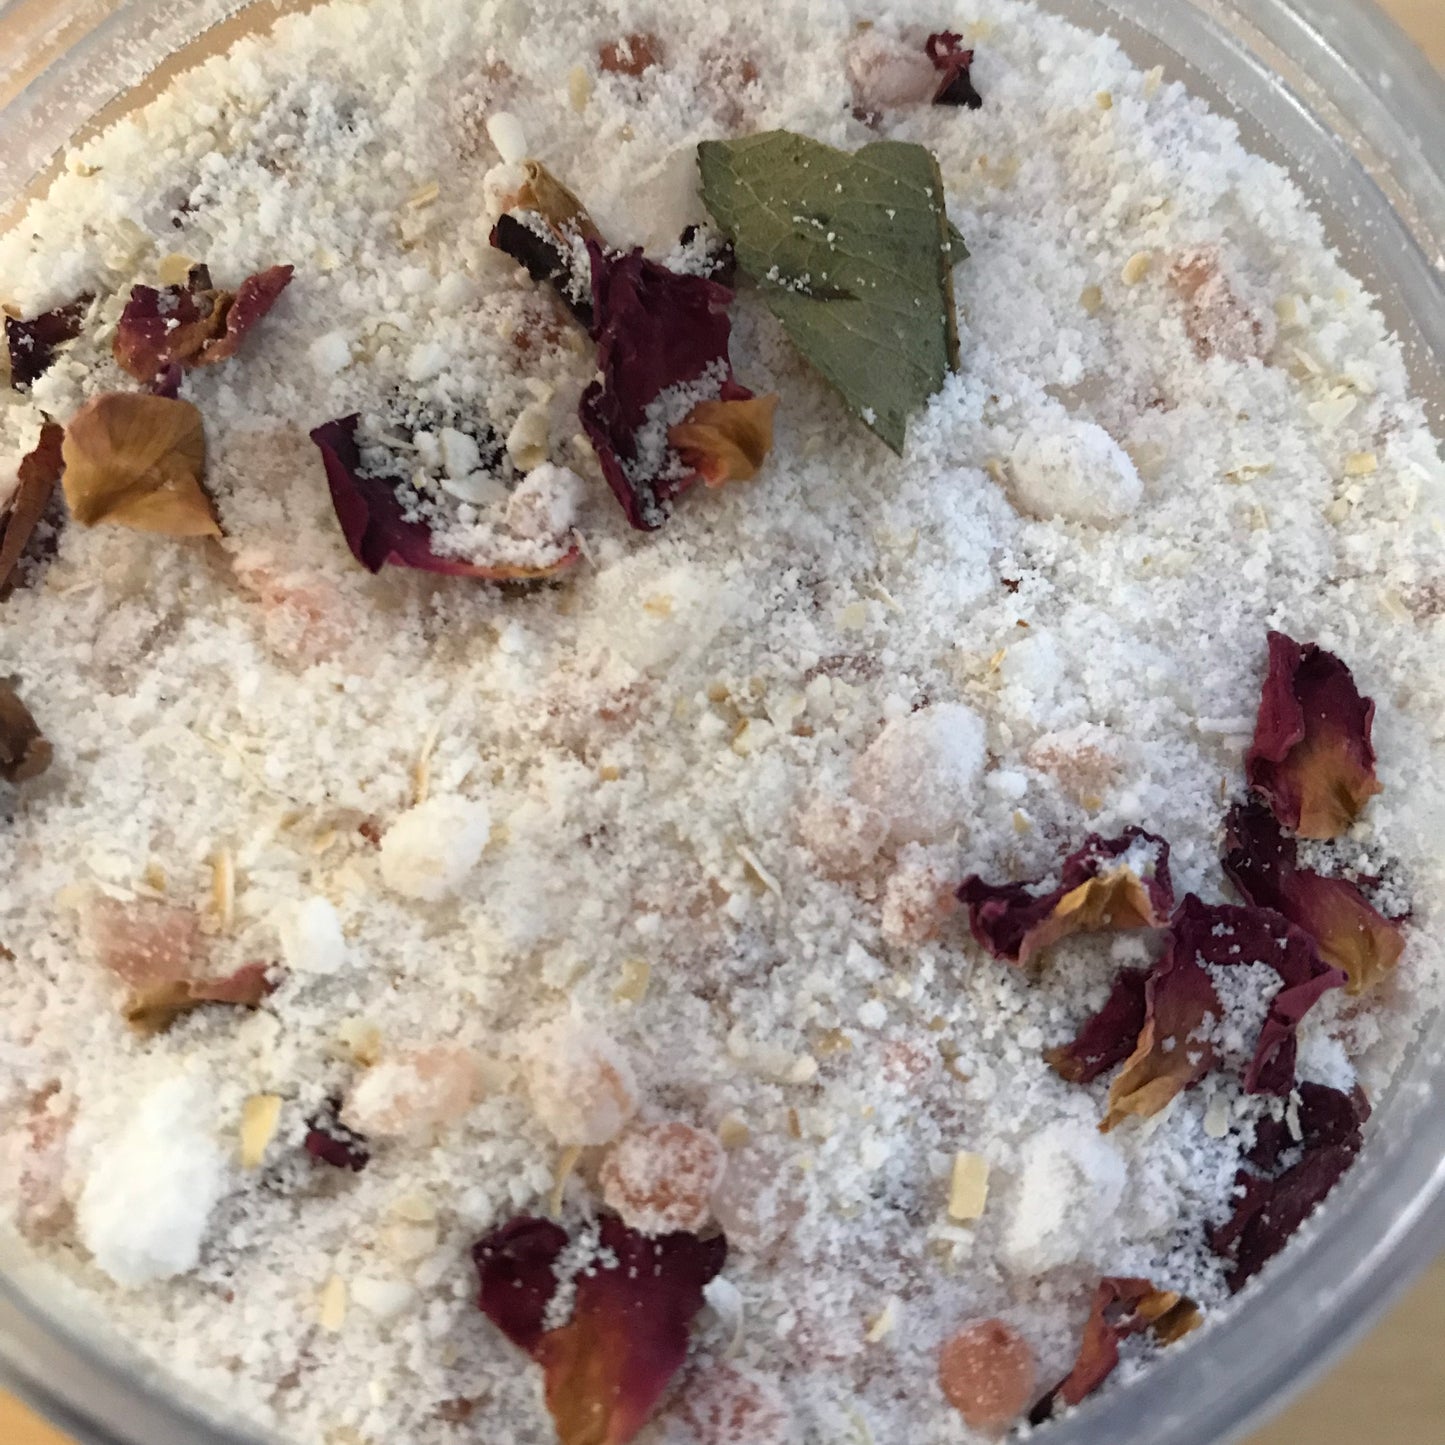 Coconut bath milk with pink sea salt and roses. Hand blended by Zabel designs. Vegan friendly. 